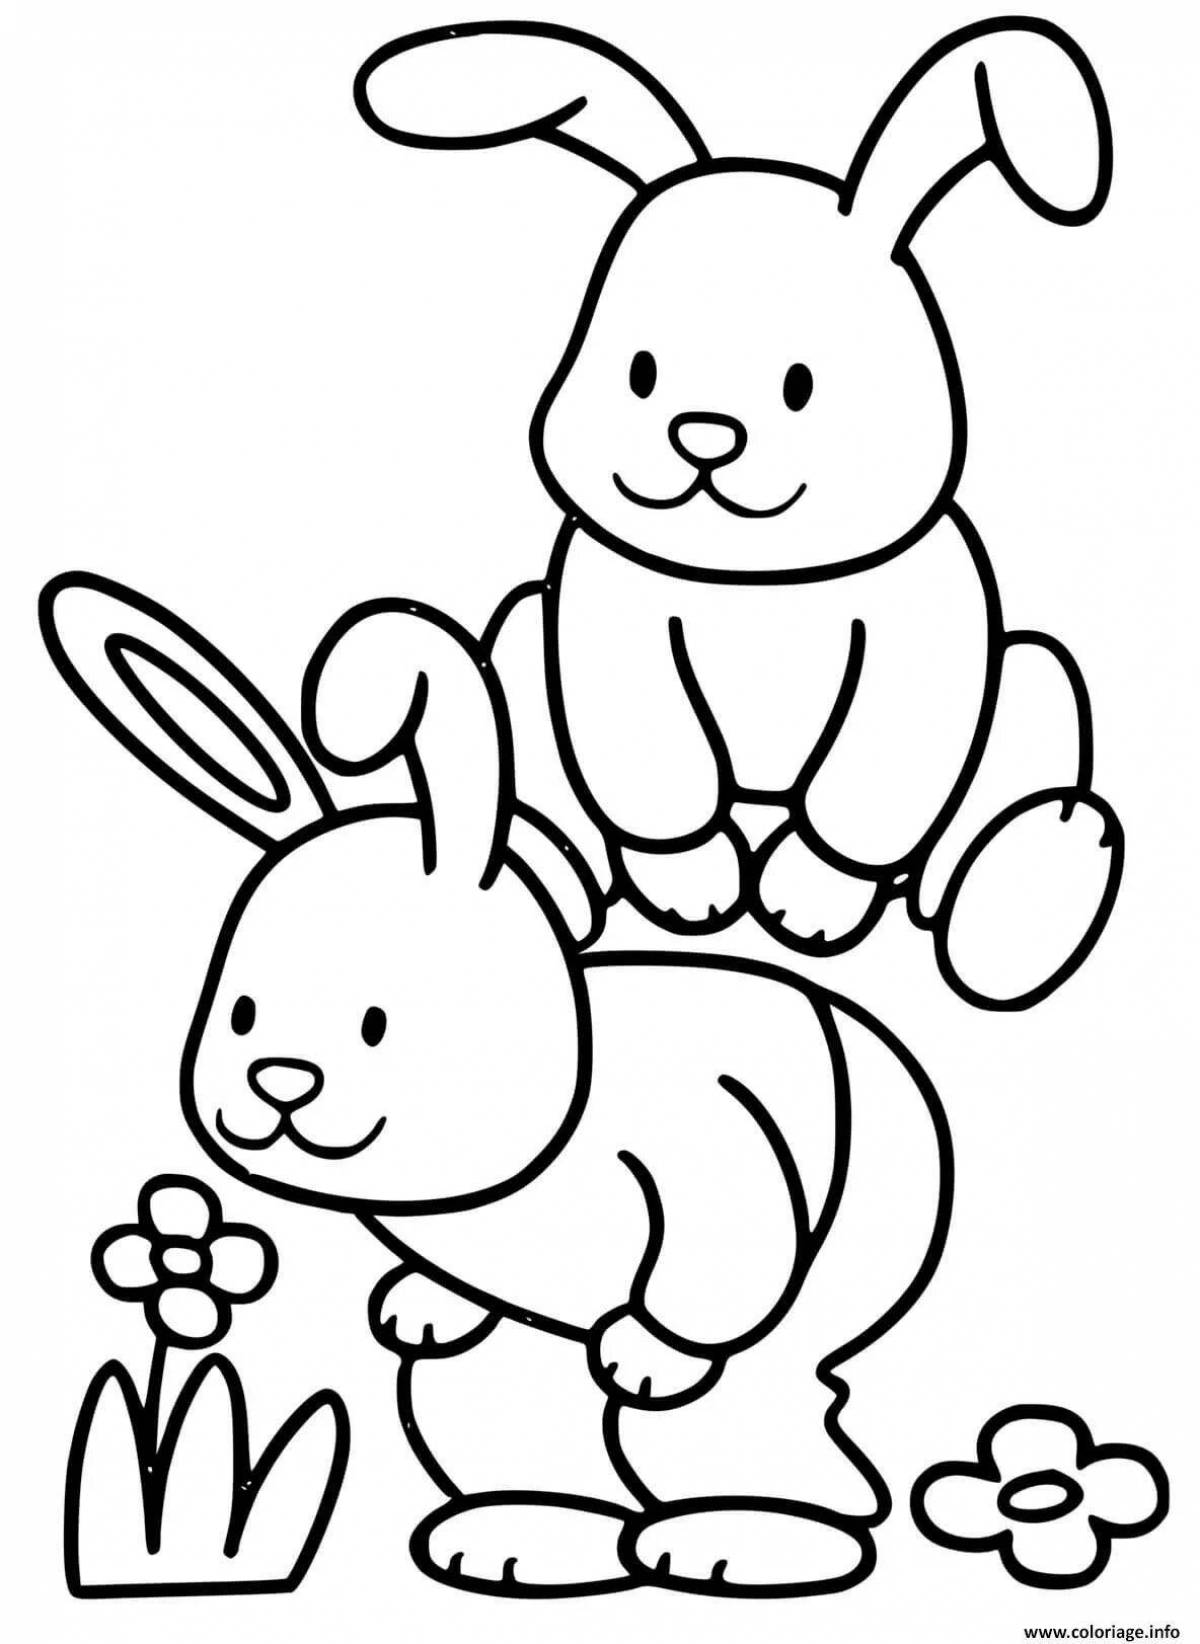 Wonderful rabbit coloring book for children 2 years old